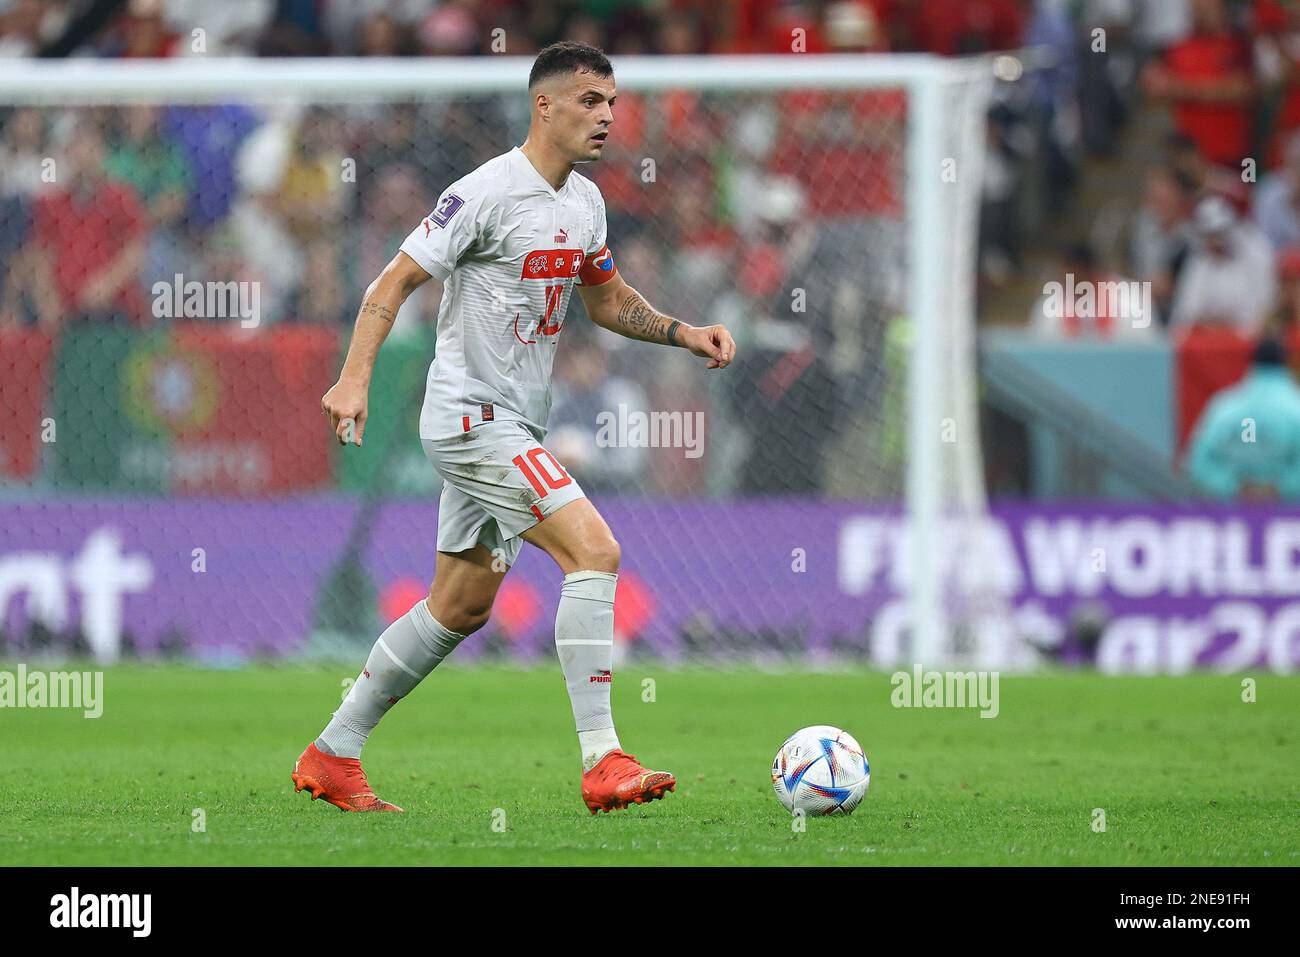 LUSAIL CITY, QATAR - DECEMBER 06: Granit Xhaka during the FIFA World Cup Qatar 2022 Round of 16 match between Portugal and Switzerland at Lusail Stadium on December 6, 2022 in Lusail City, Qatar. (Photo by MB Media) Stock Photo